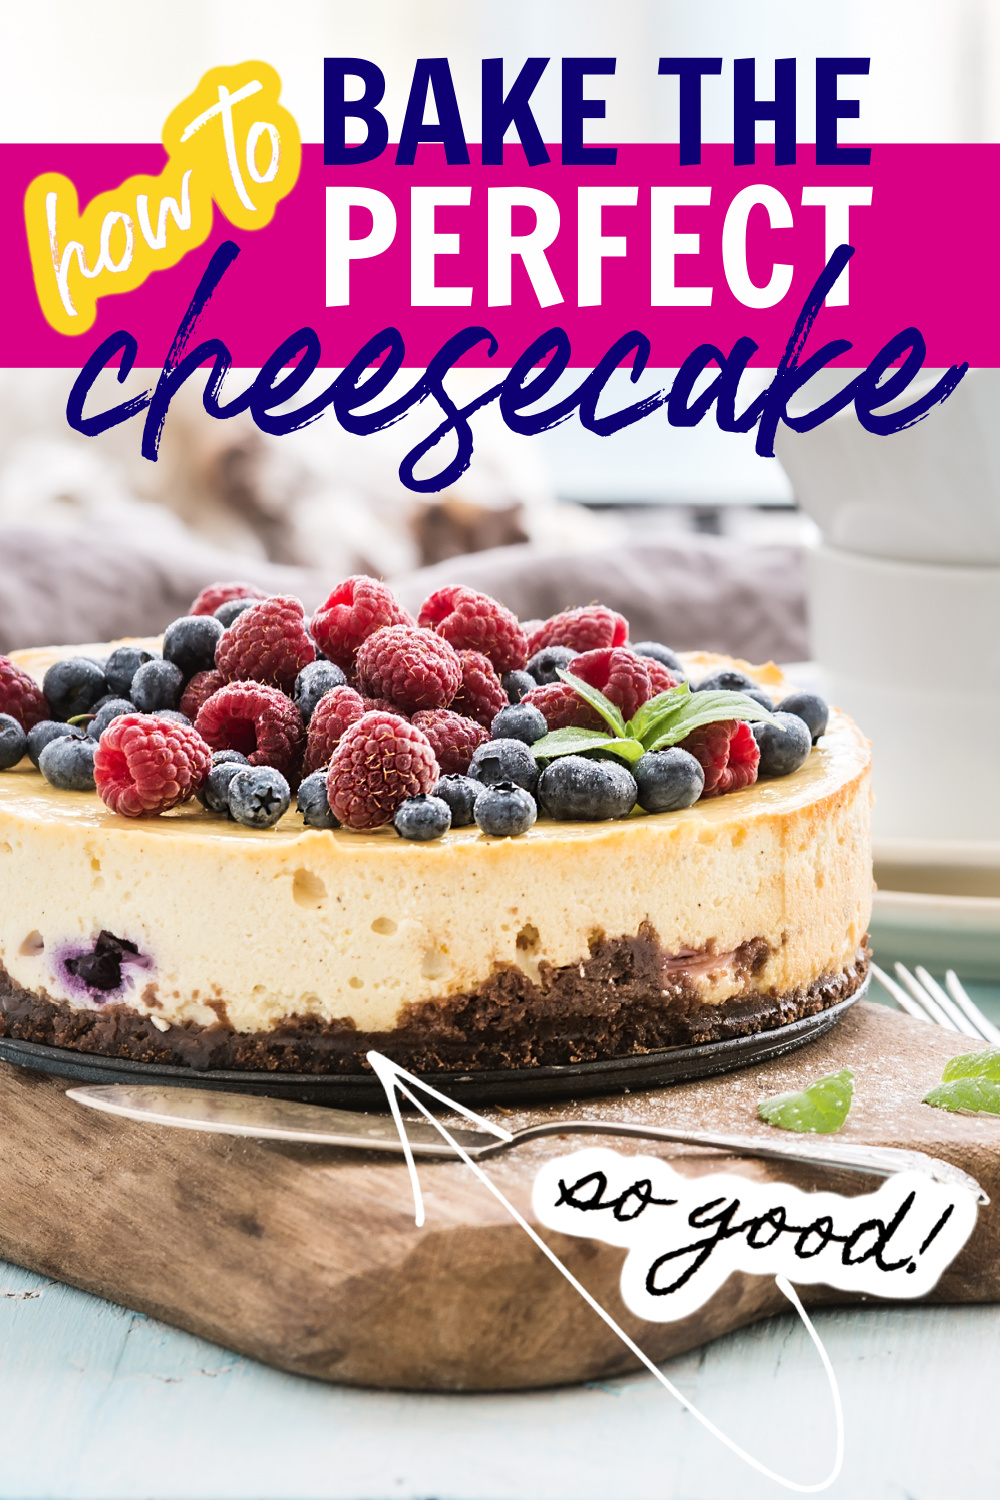 I'm spilling all the info on How to Bake the Perfect Cheesecake. Below are tips and suggestions for baking the perfect creamy cheesecake that doesn't crack.